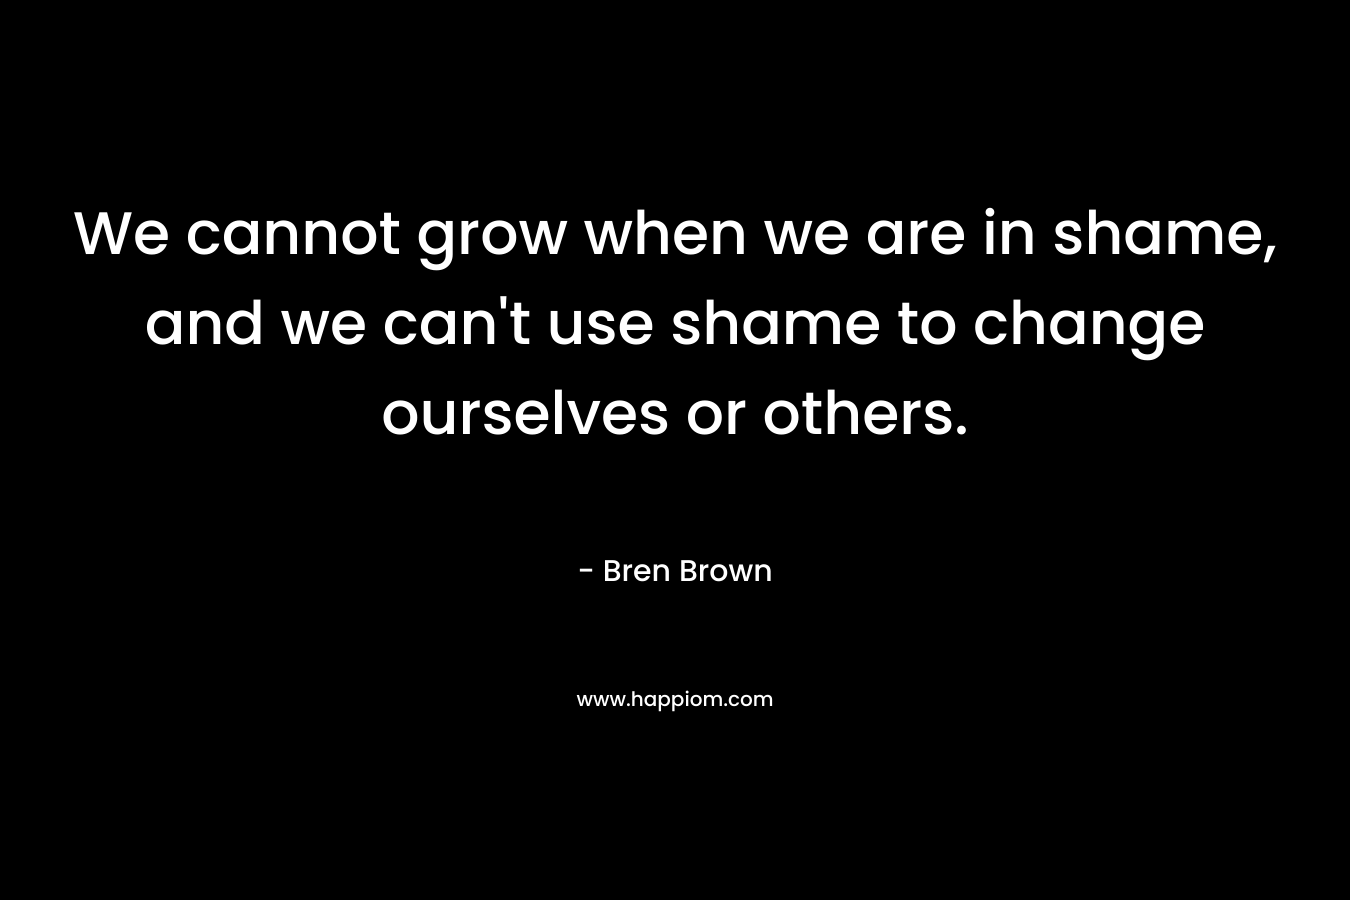 We cannot grow when we are in shame, and we can't use shame to change ourselves or others.